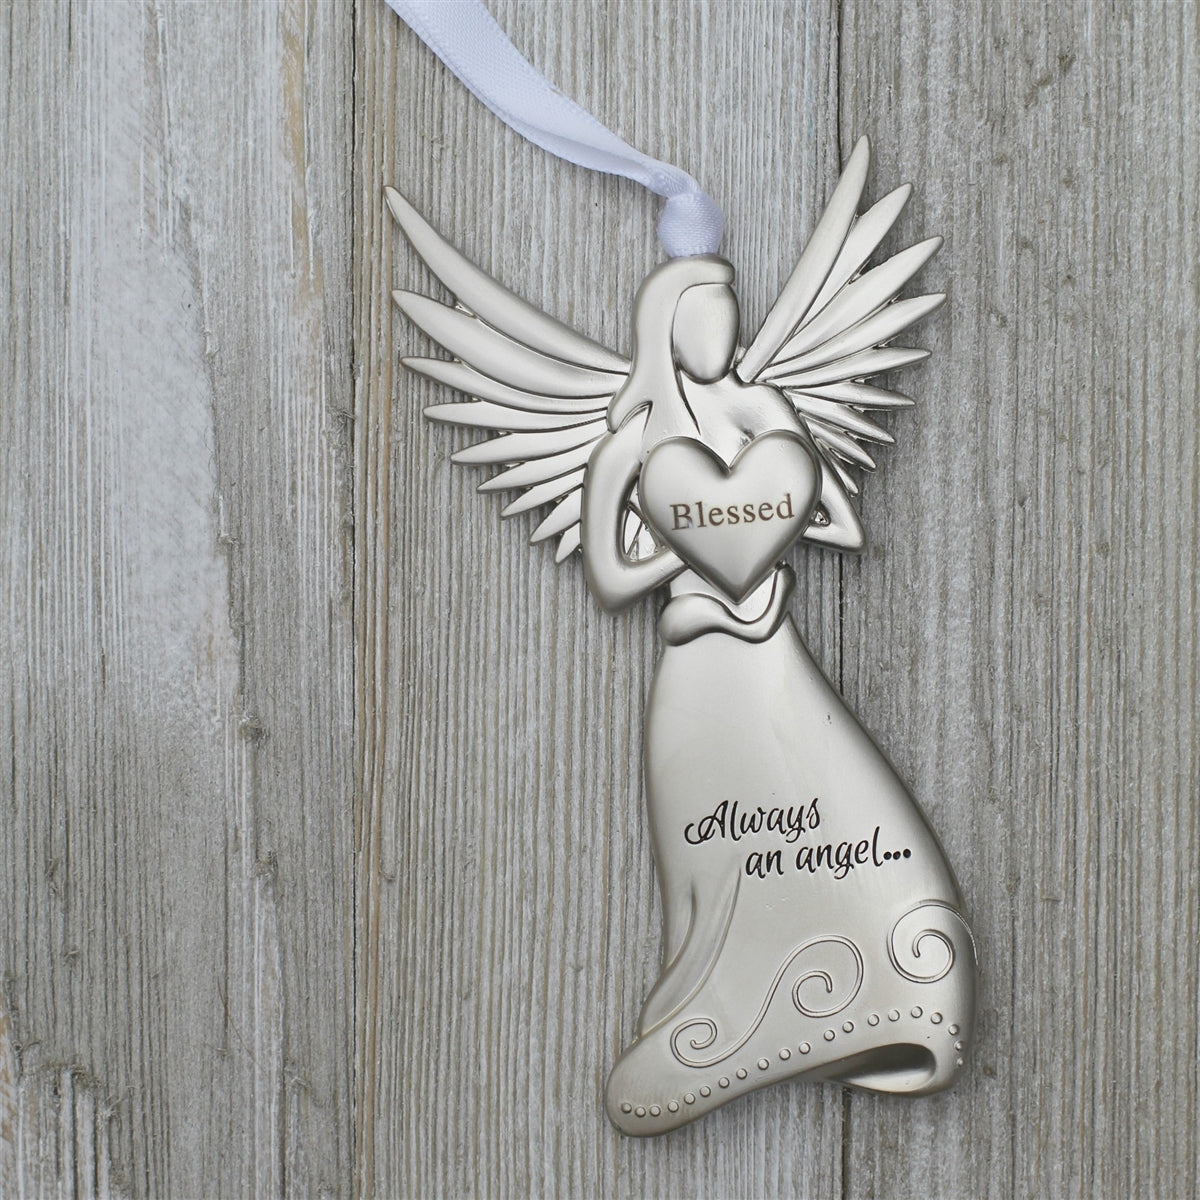 Angel with white satin ribbon for hanging.